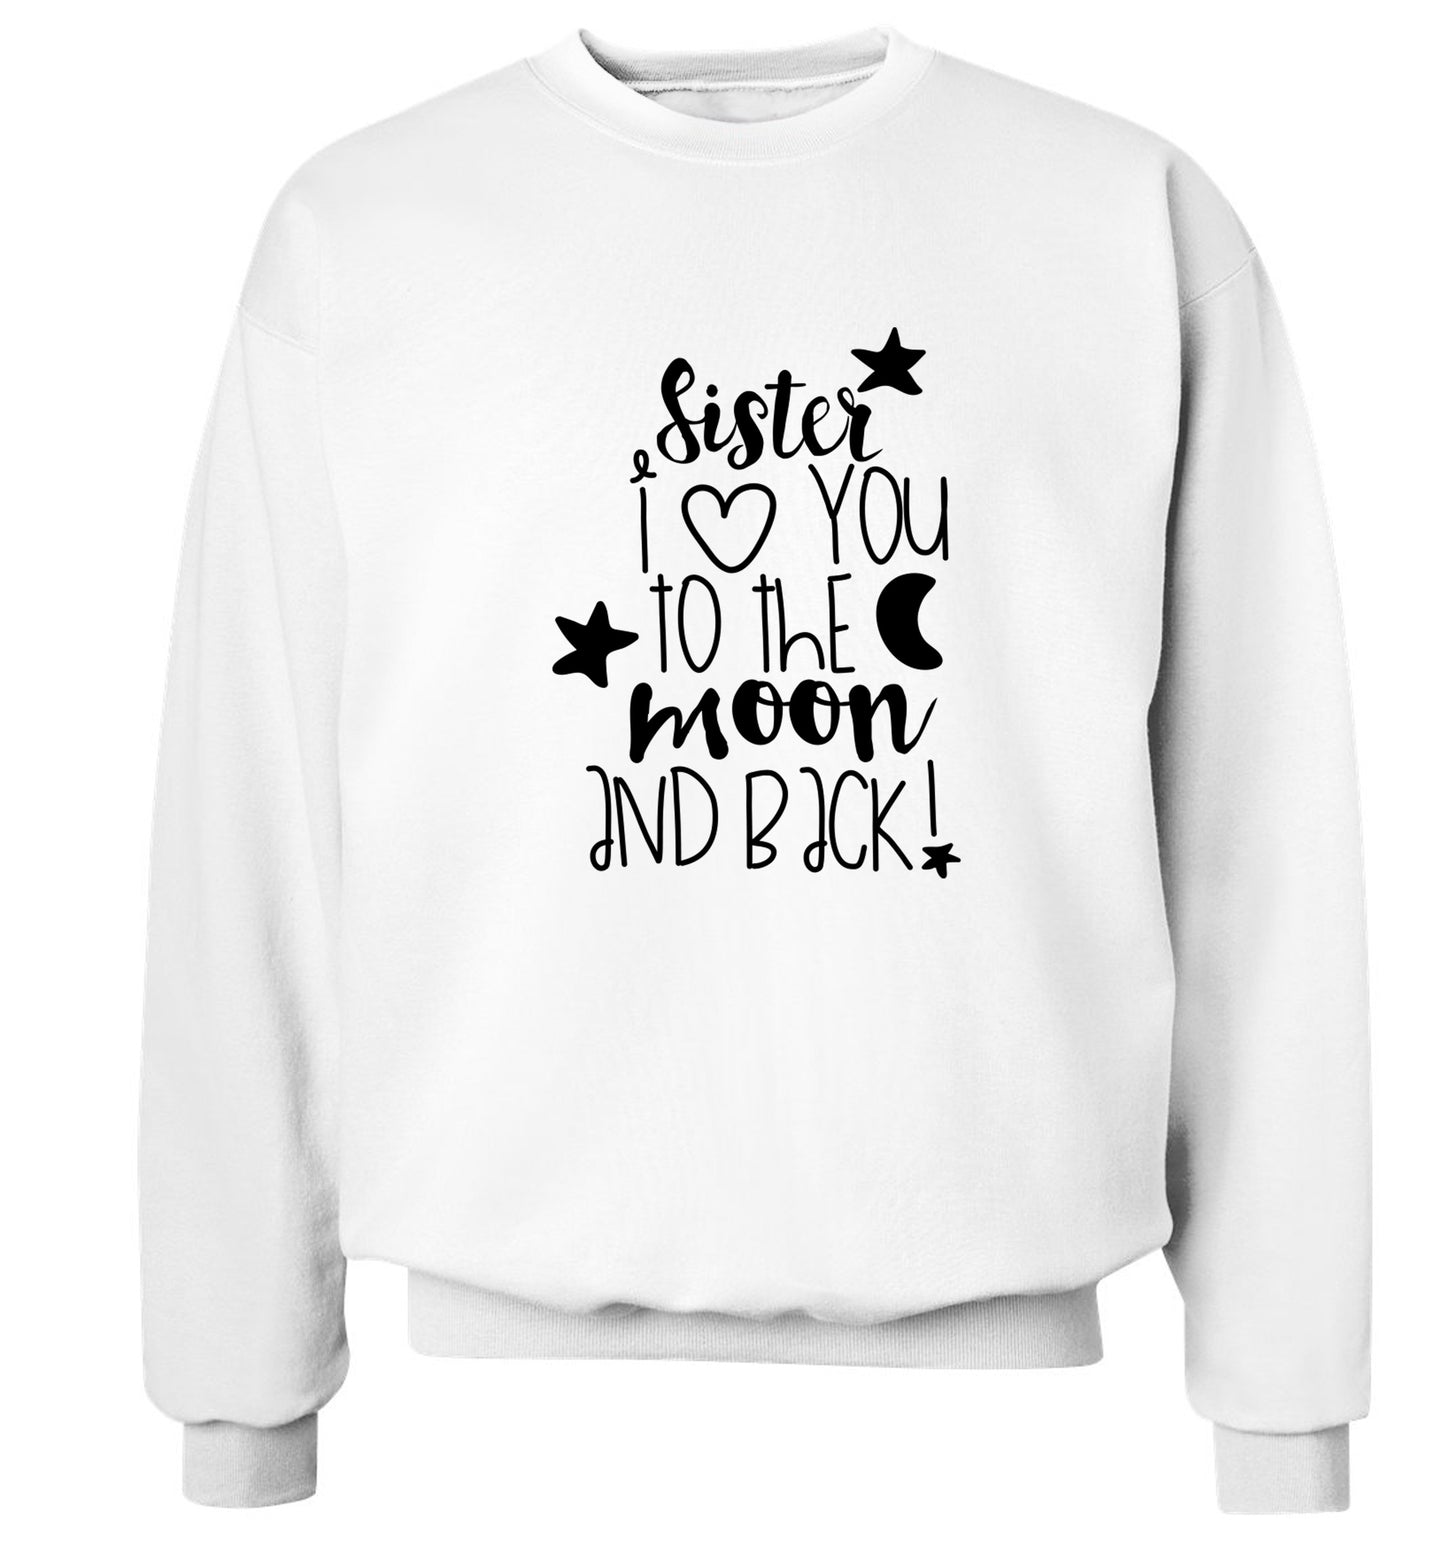 Sister I love you to the moon and back Adult's unisex white  sweater 2XL